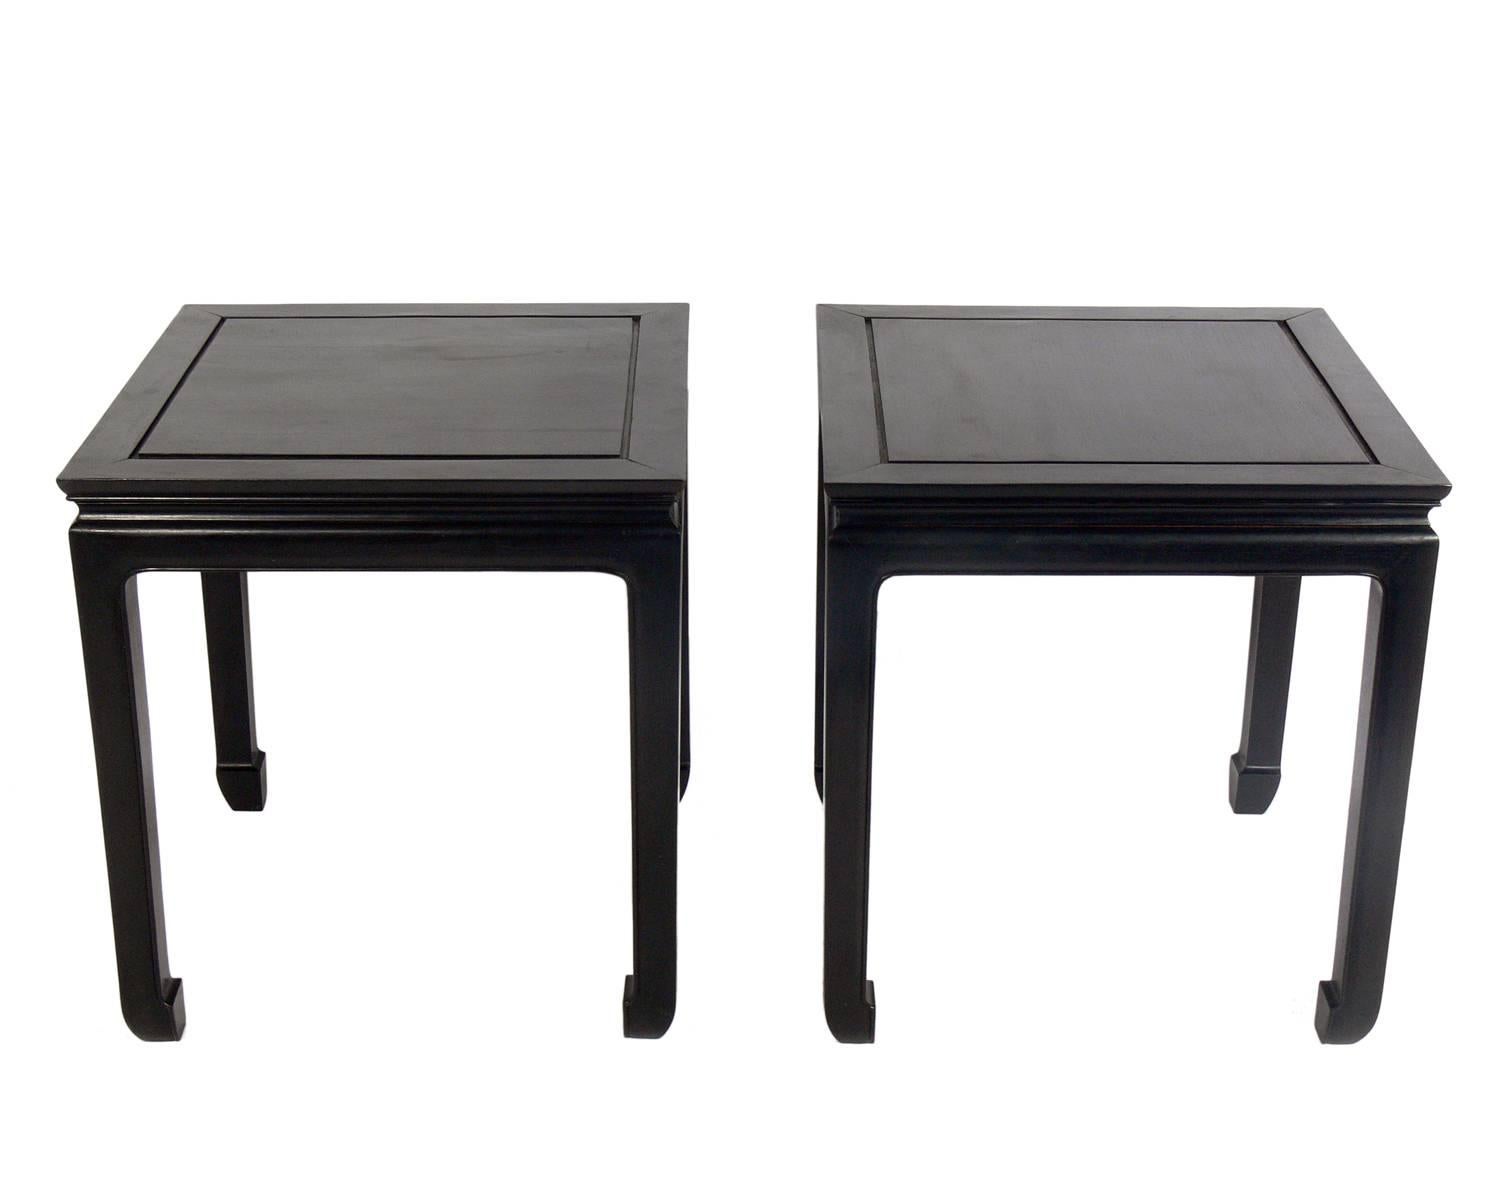 Pair of Asian influenced end tables or nightstands, Asian, circa 1950s. They are a versatile size and can be used as side or end tables, or as nightstands. These tables are currently being refinished and can be completed in your choice of color. The